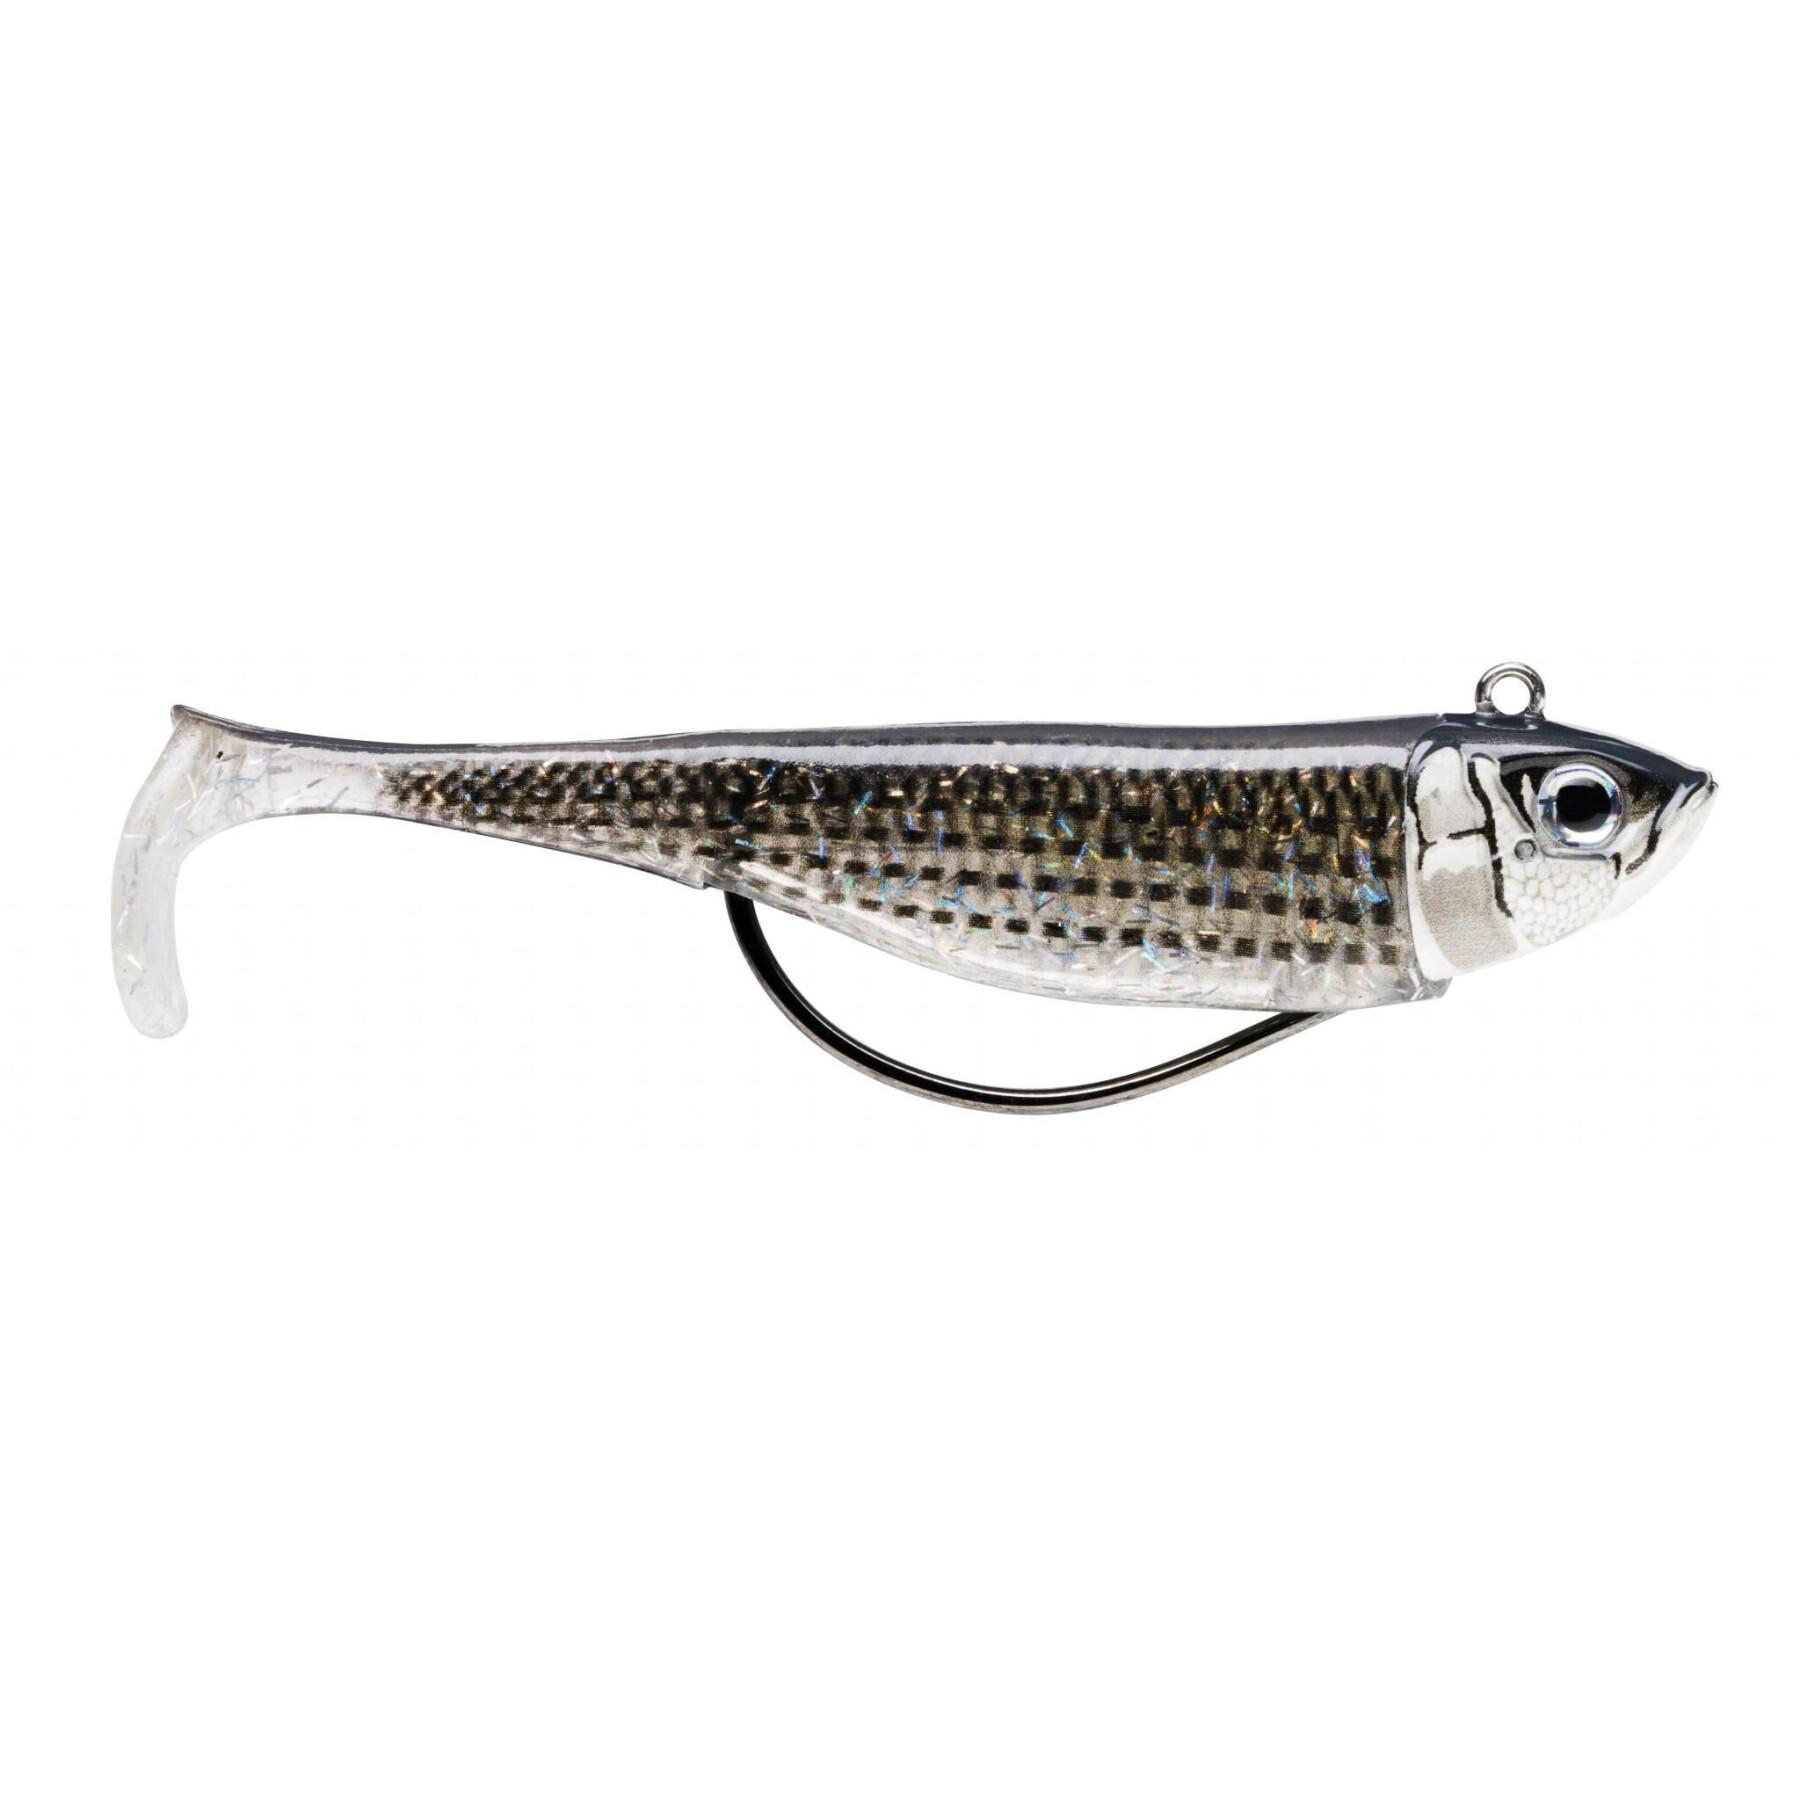 Engodos Storm Biscay Shad – 40g (x2)